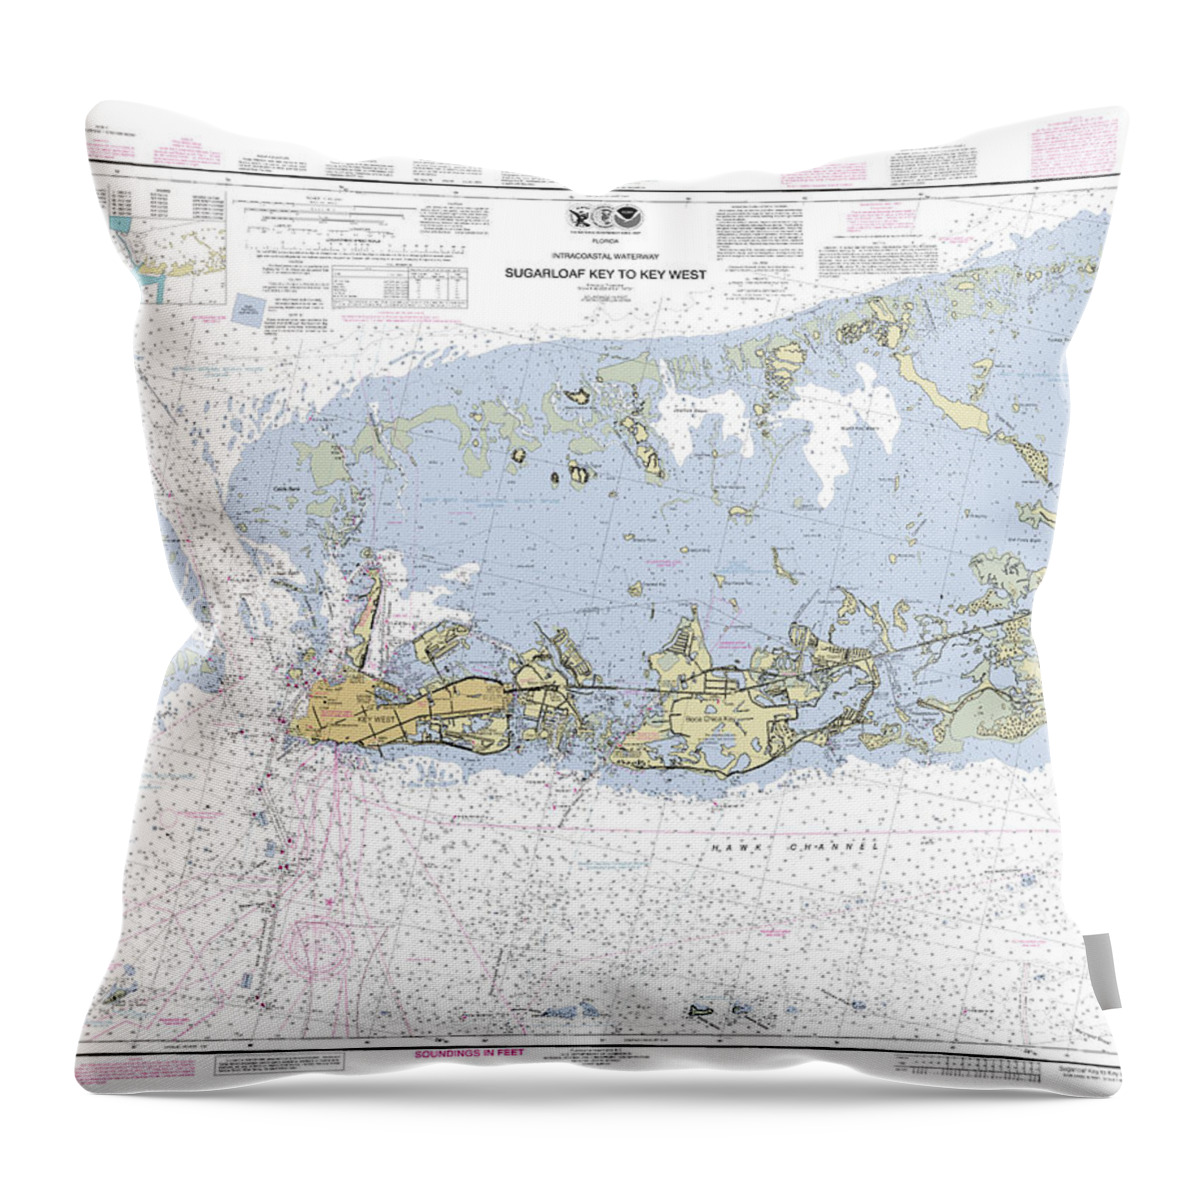 Sugarloaf Key To Key West Throw Pillow featuring the digital art Sugarloaf Key to Key West, NOAA Chart 11446 by Nautical Chartworks